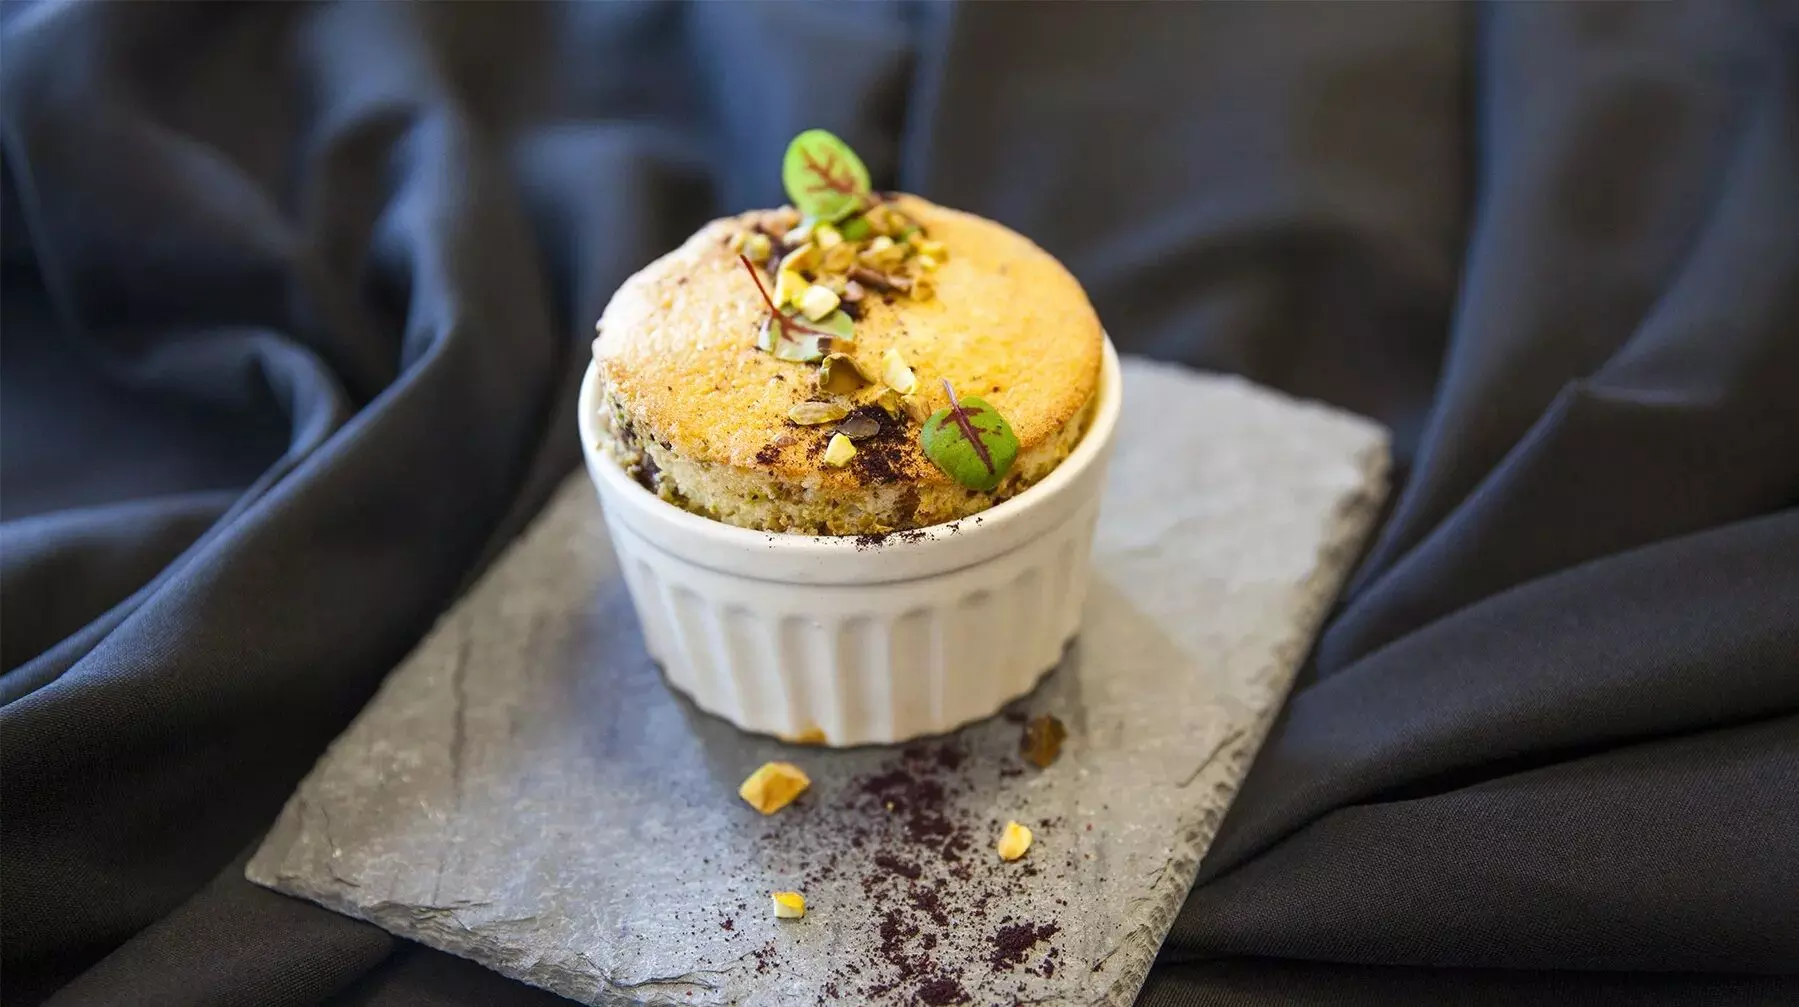 Baked Pistachio Souffle Recipe: With just egg whites, sugar and pistachios, you can make souffles in less than 15 minutes